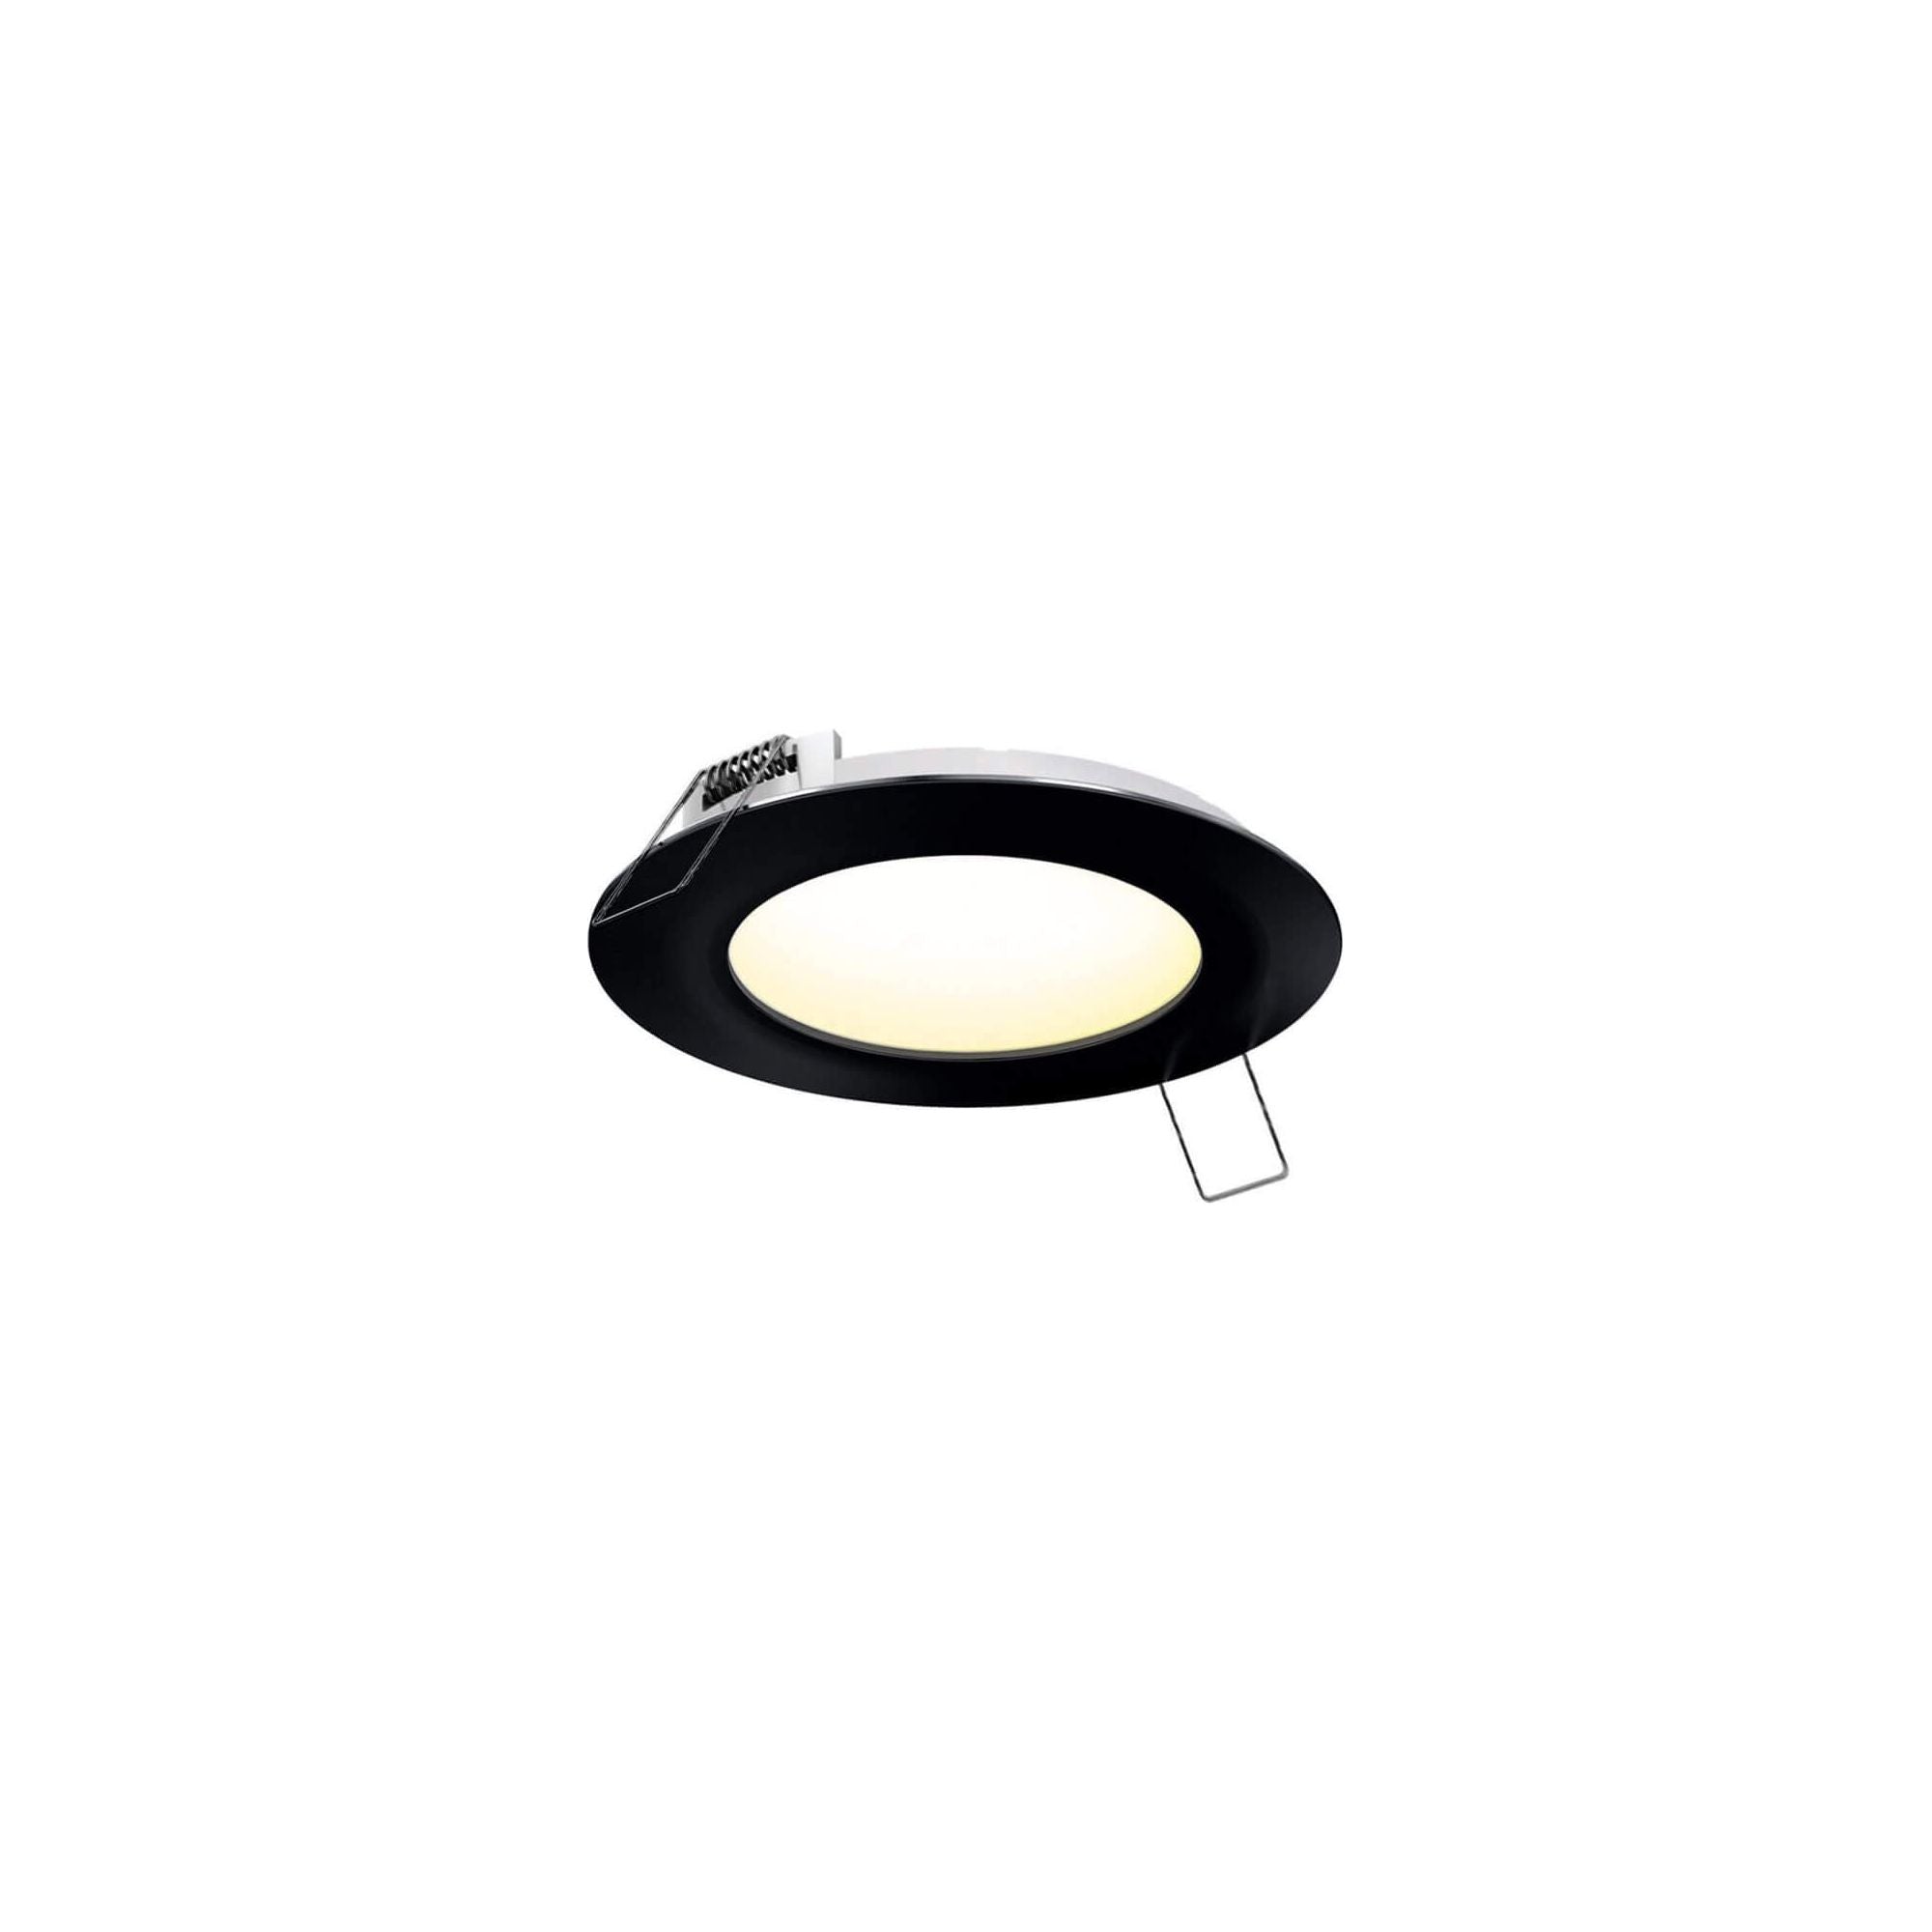 Excel 3" Round CCT LED Recessed Panel Light